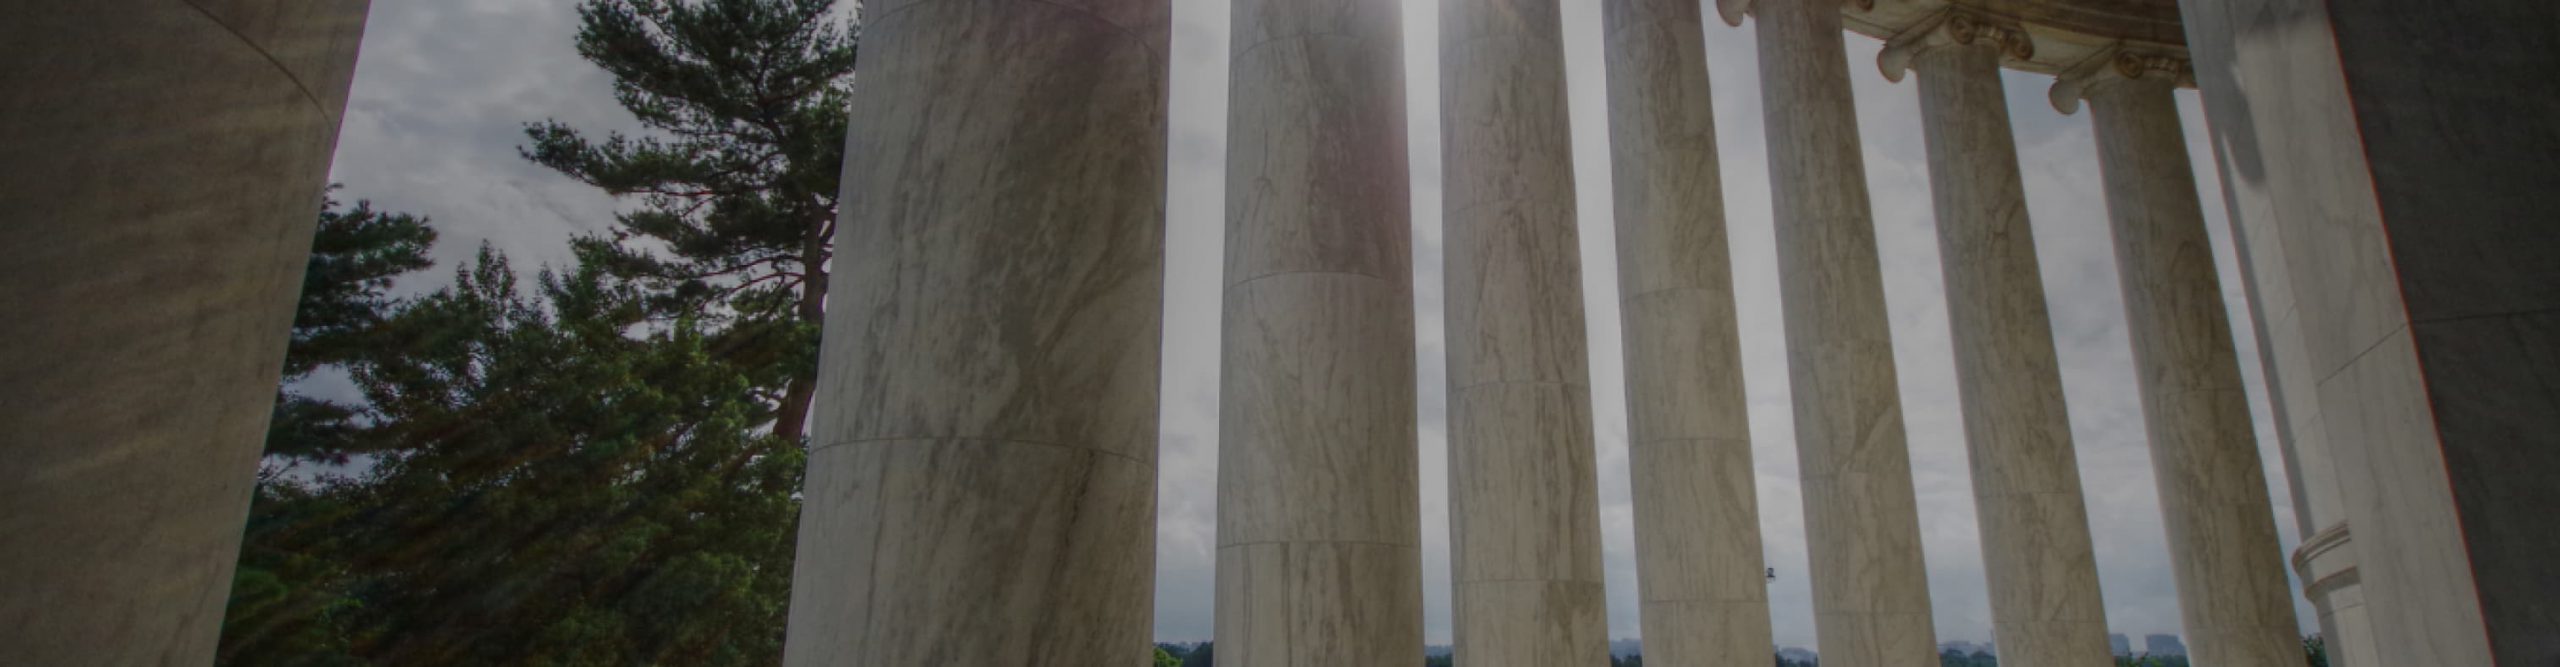 Marble columns foregrounded against trees and a cloudy sky.